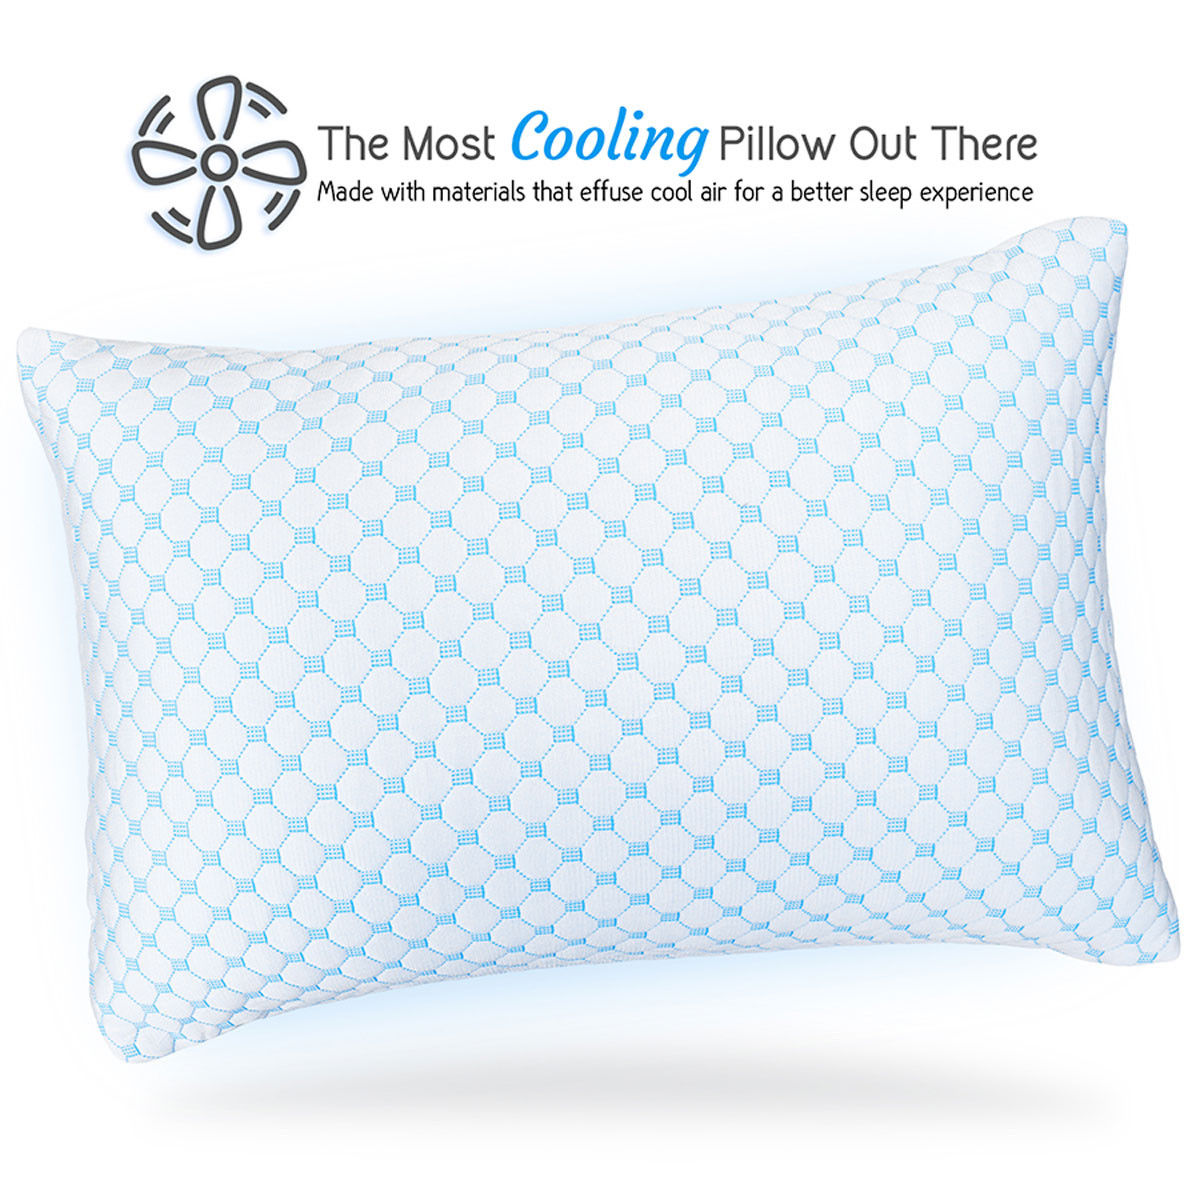 What is the Clara Clark pillow and how does it provide cooling?